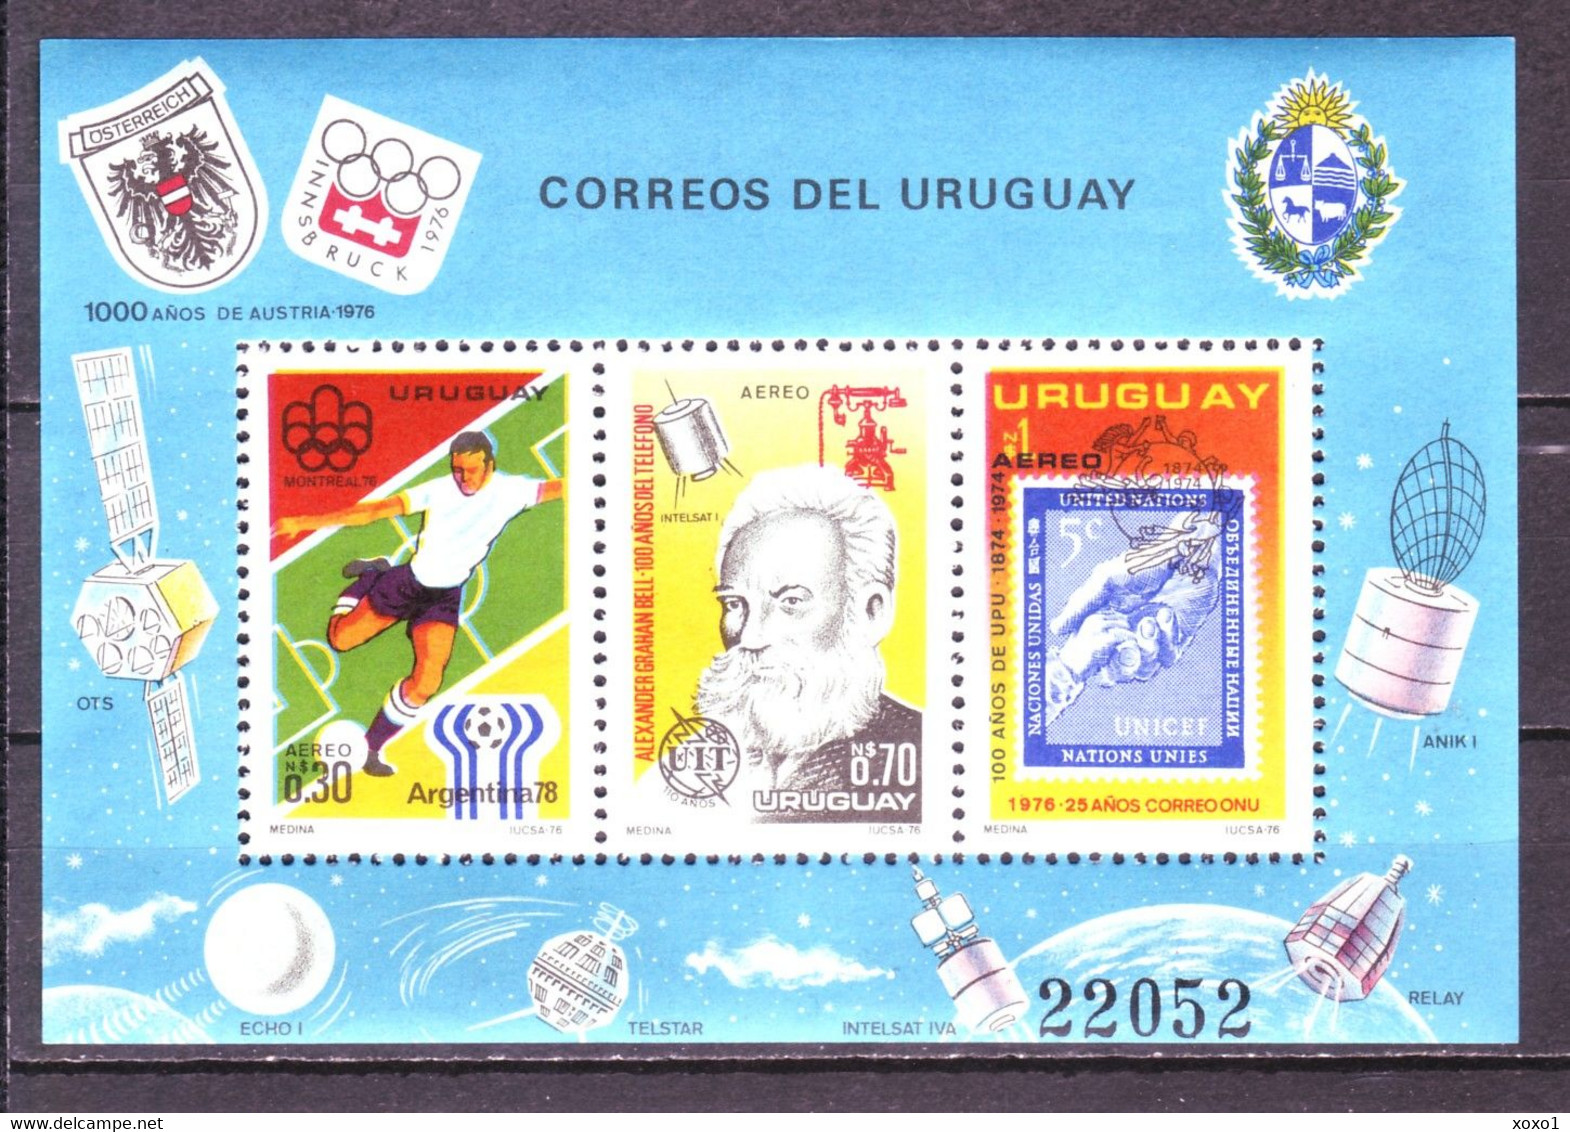 Uruguay 1976 MiNr. 1406 - 1408 (Block 29) Sport Olympic Games Space Soccer Stamps On Stamps UIT UPU 1 S\sh MNH** 55,00 € - Ete 1976: Montréal